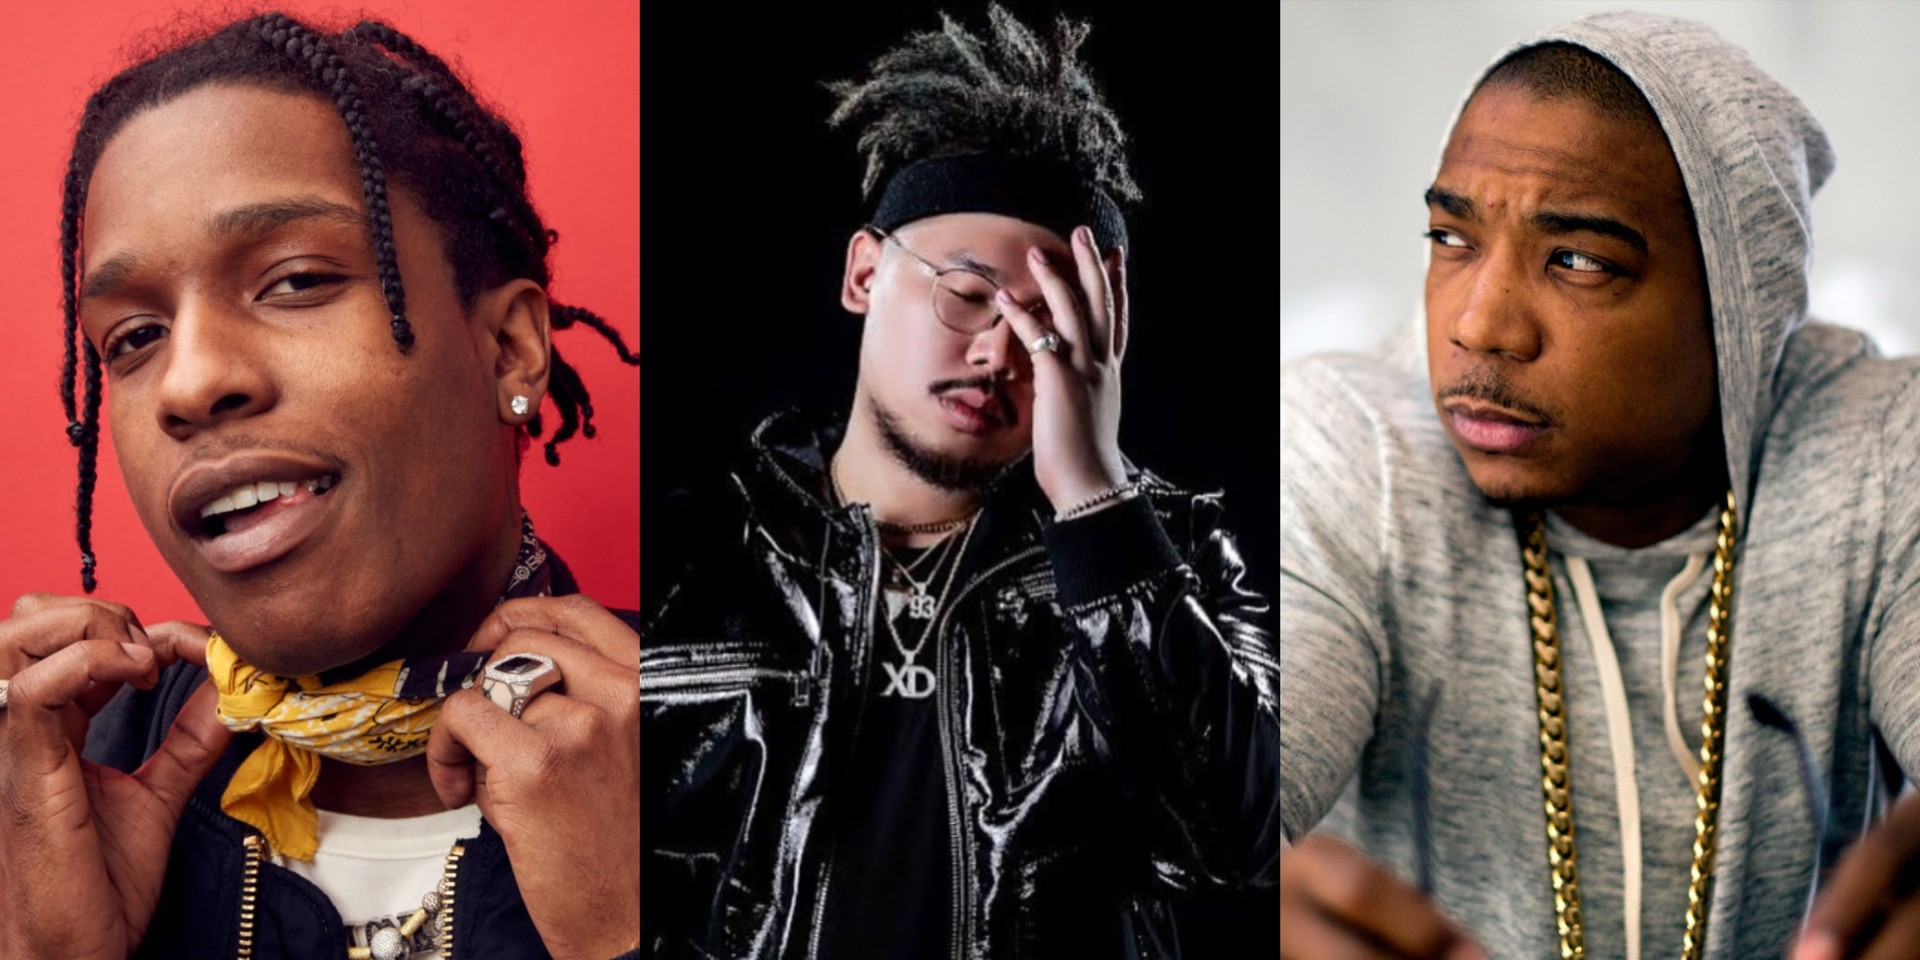 Which VOLO Festival rapper are you? Take this quiz to find out!